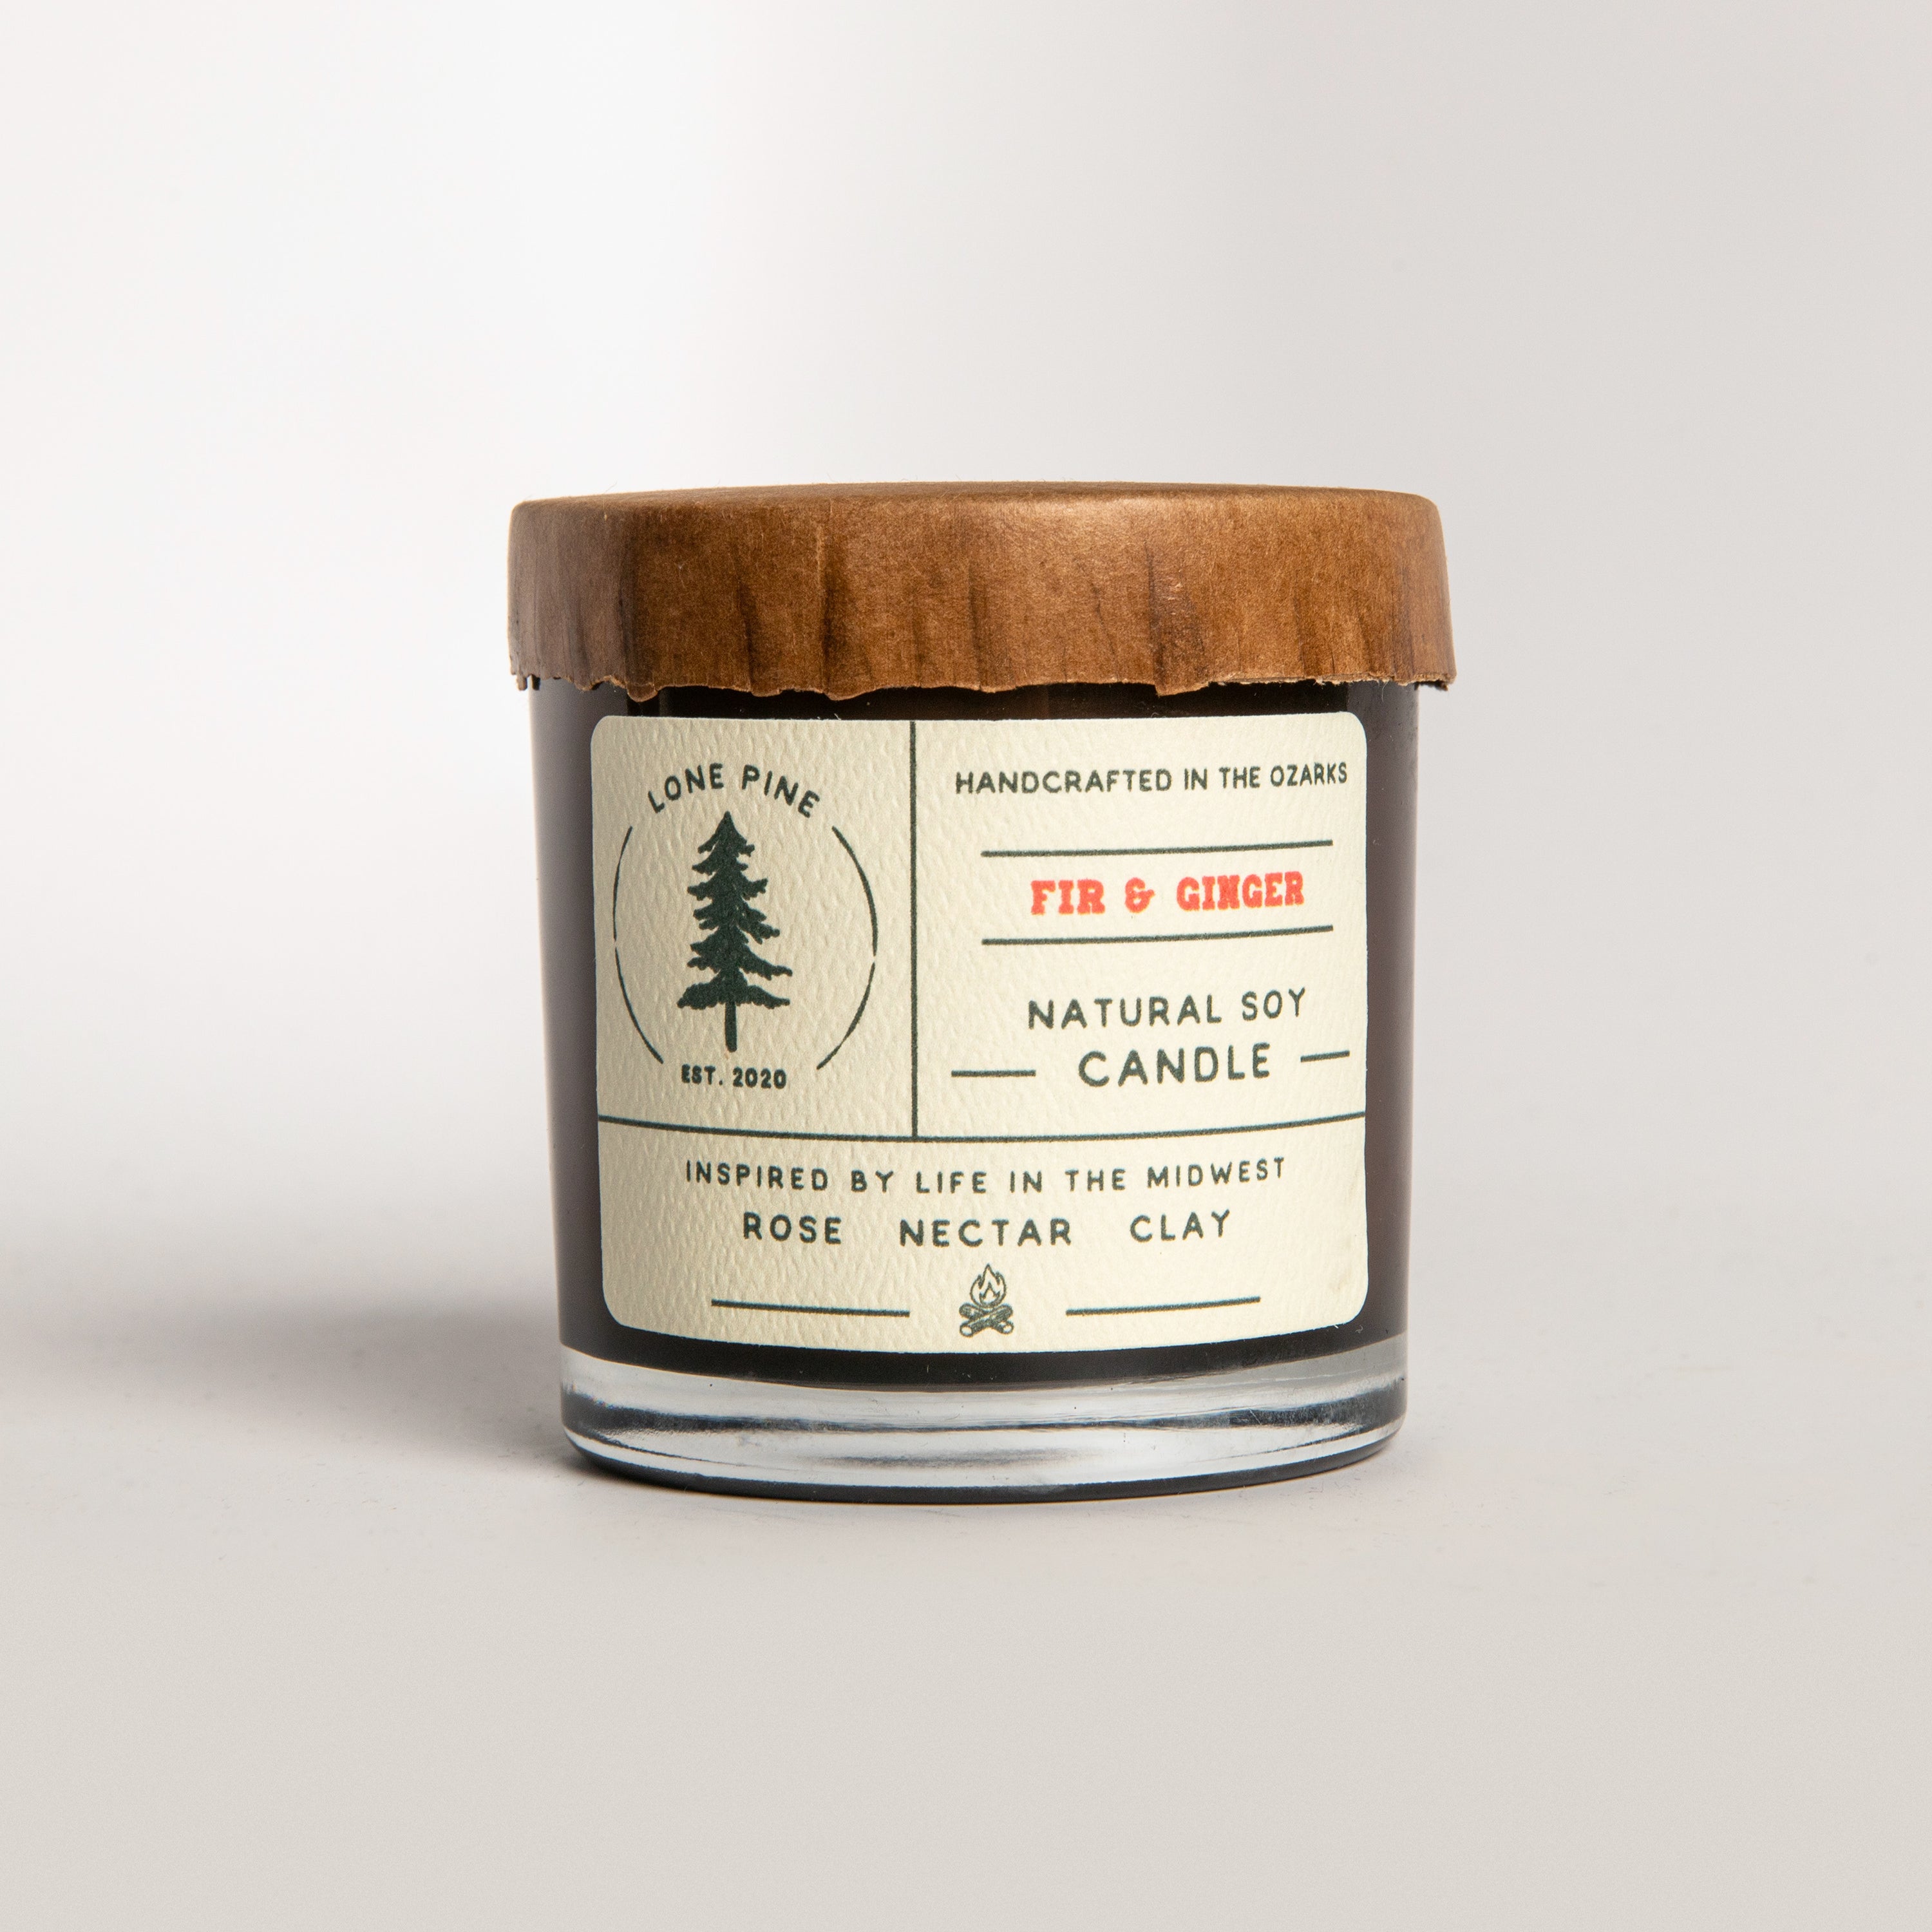 Fir & Ginger Soy Candle